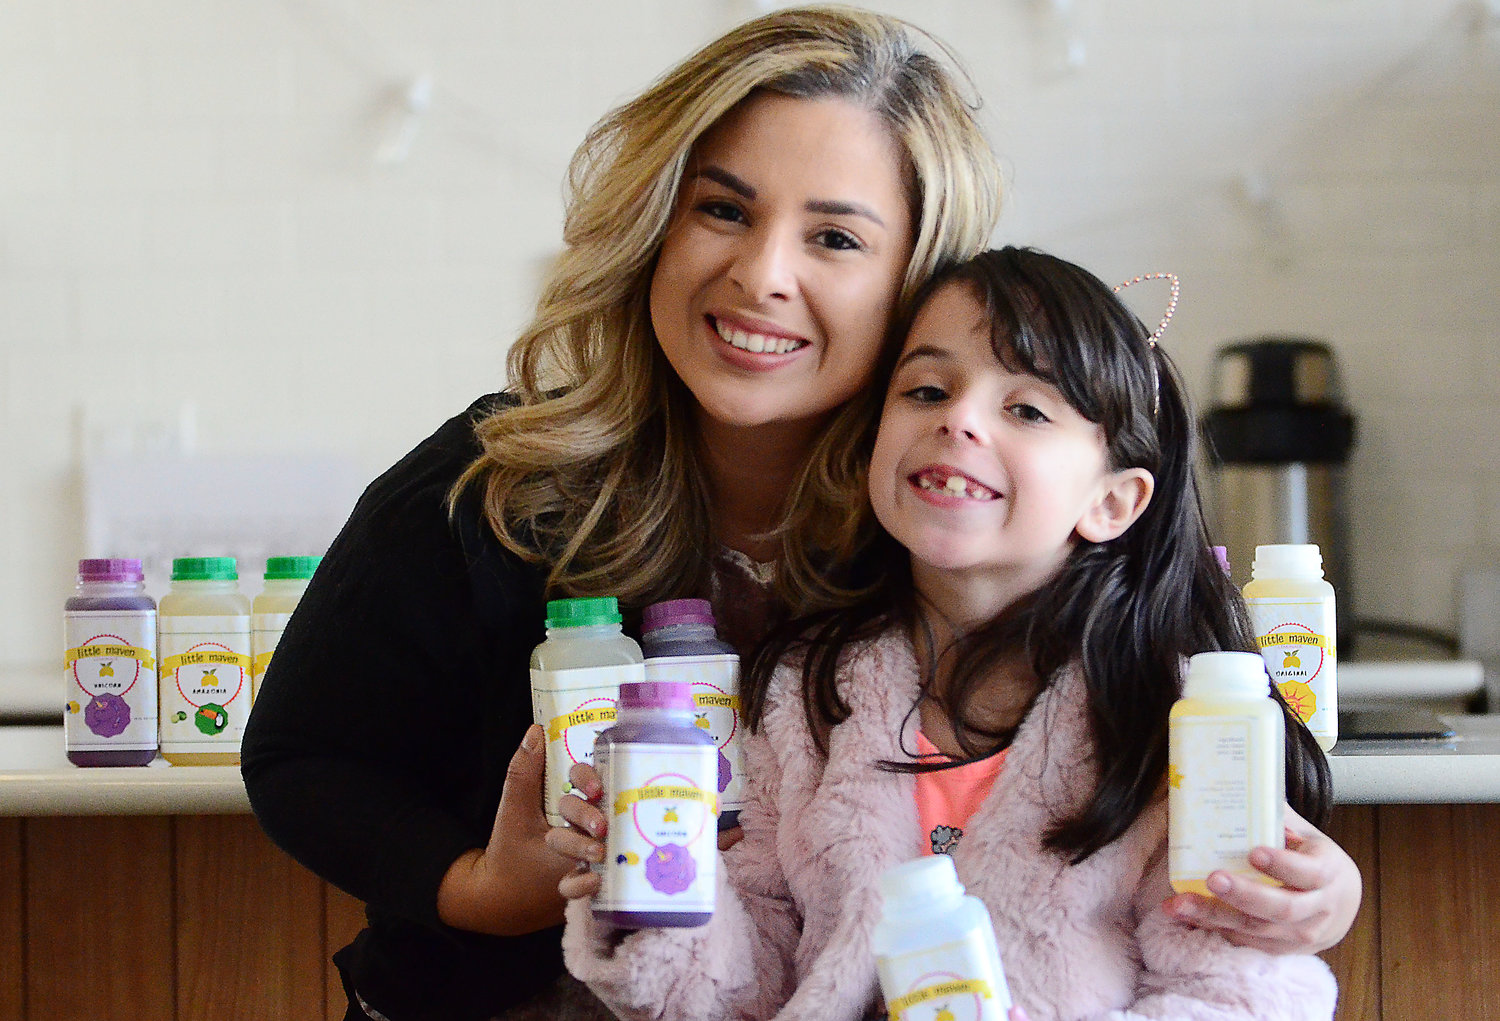 Mariana Silva-Buck and her daughter, Sofia, are building a lemonade business built on different recipes from different cultures. Operating out of Hope & Main in Warren, the pair work together on design and leadership of Little Maven.